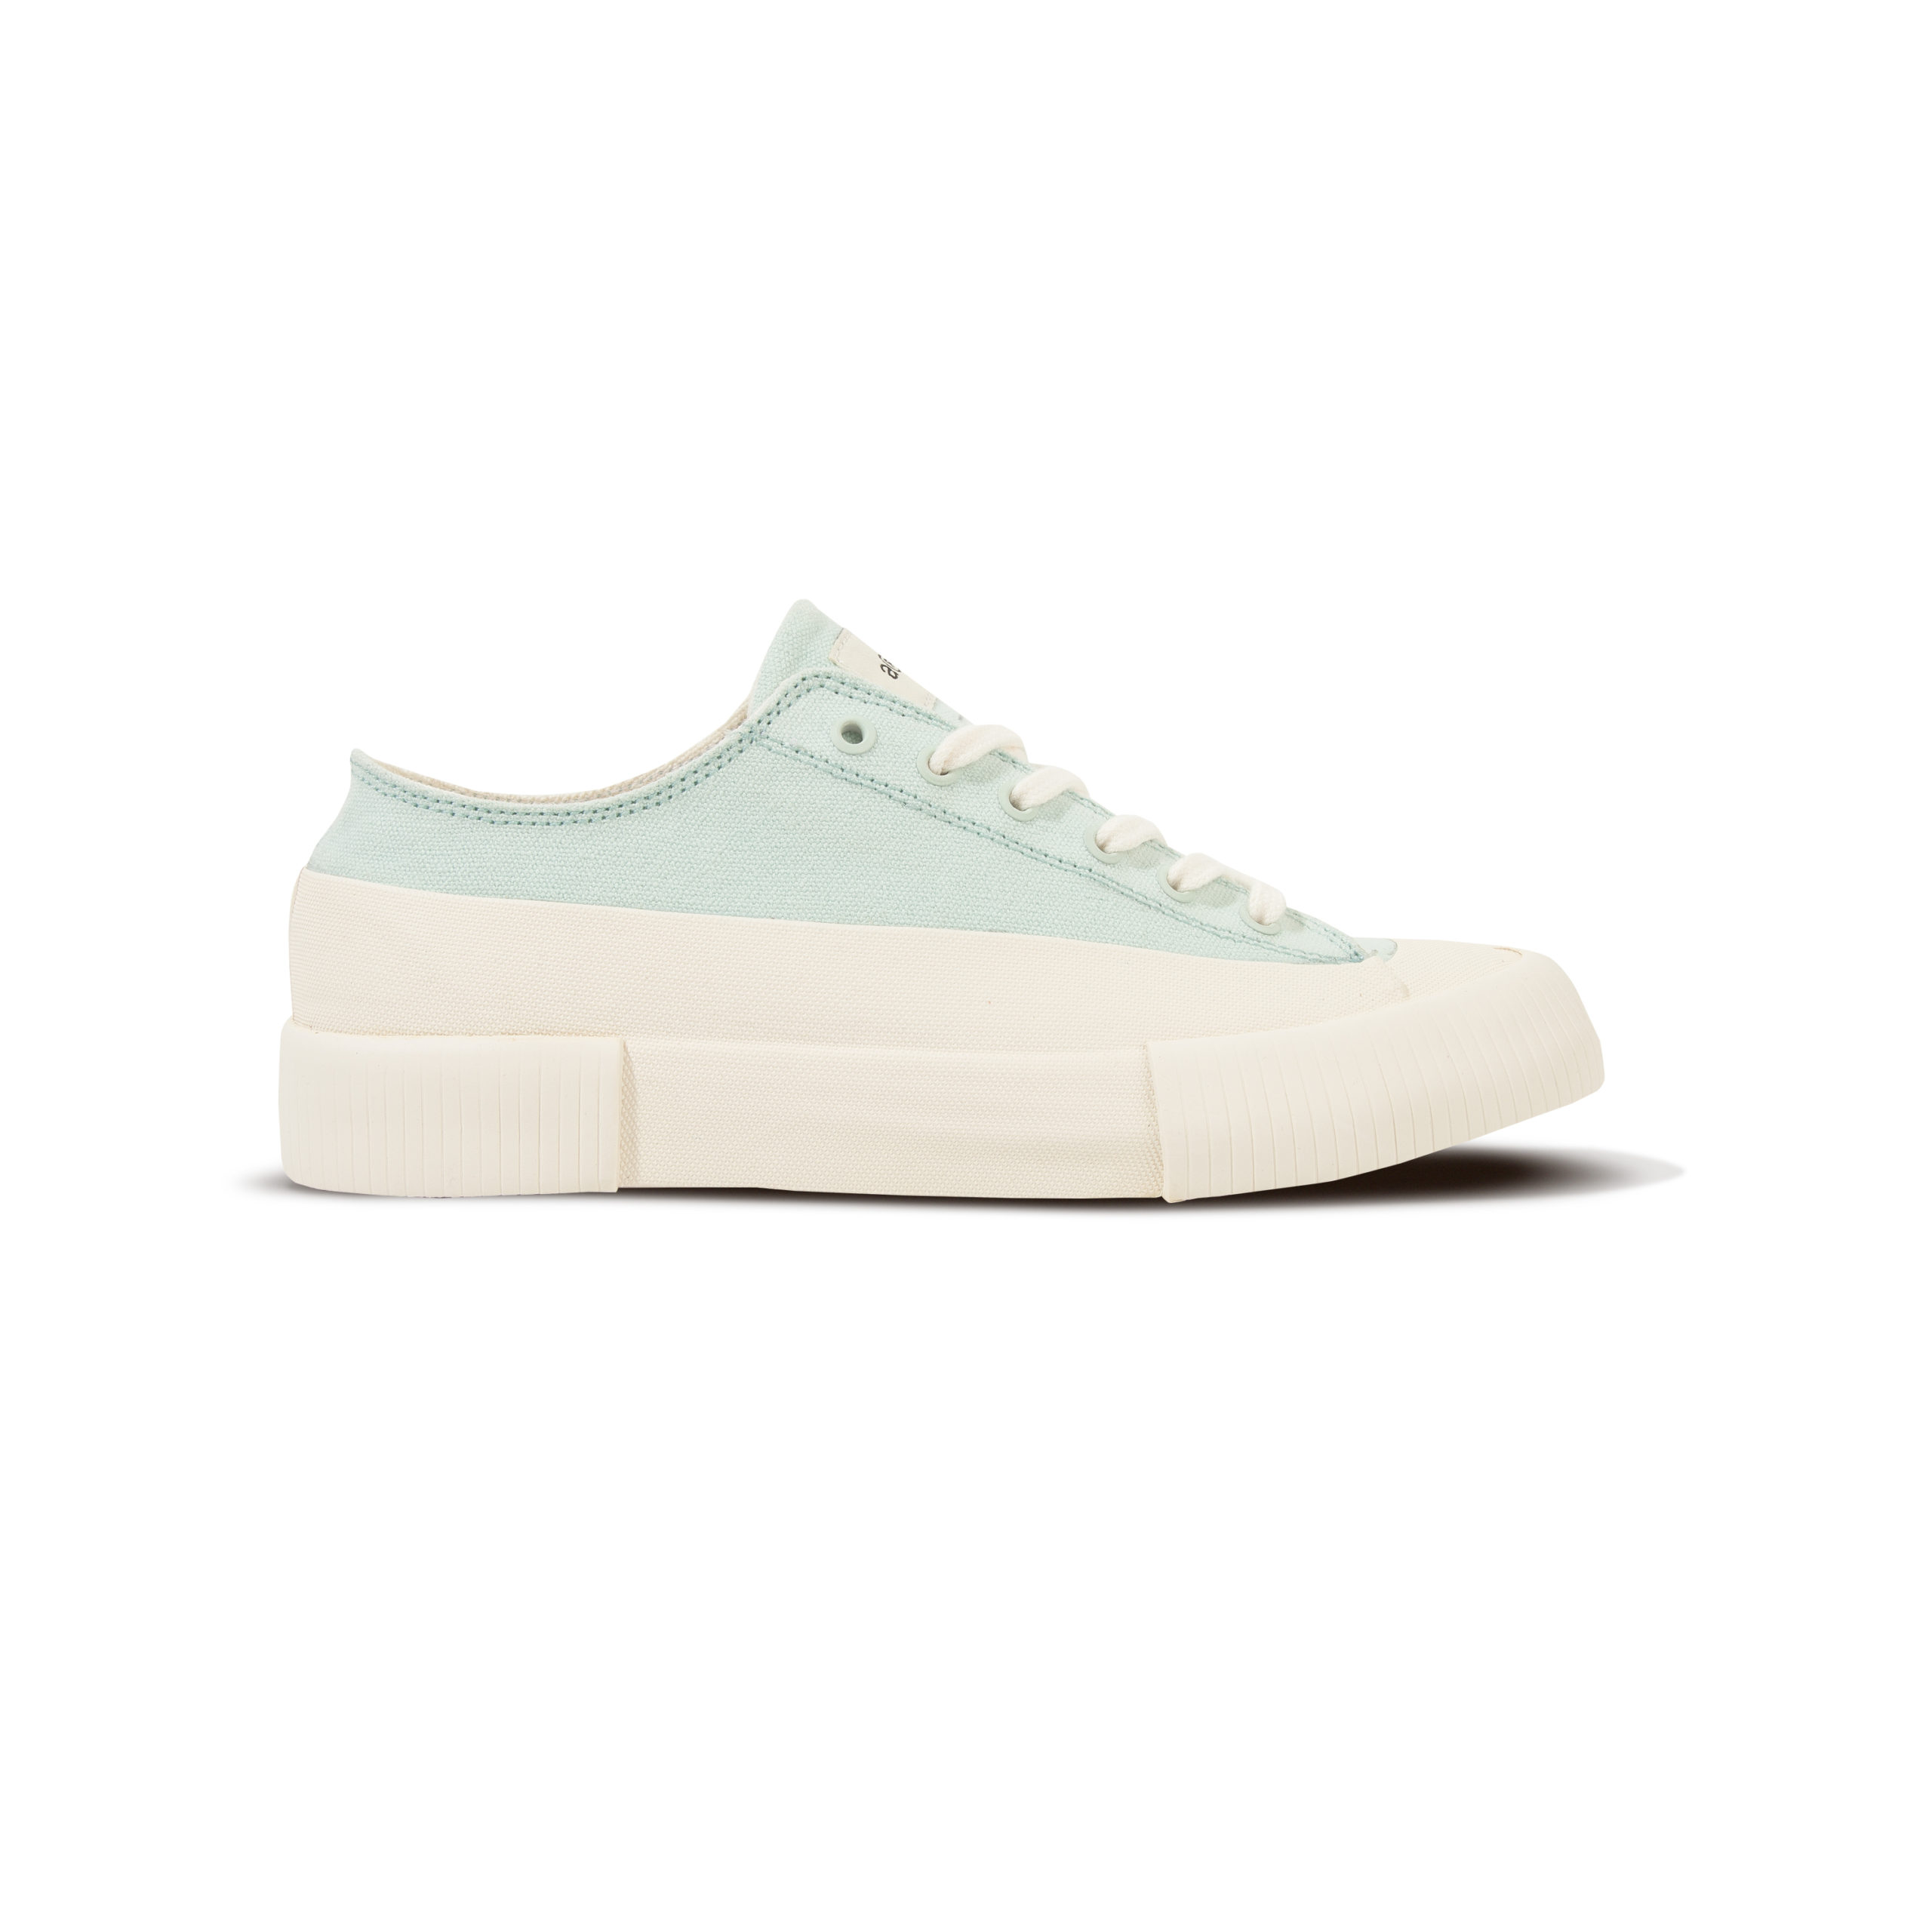 Arise Groov Shoes - Low Canvas Seafoam - Well Bred Store